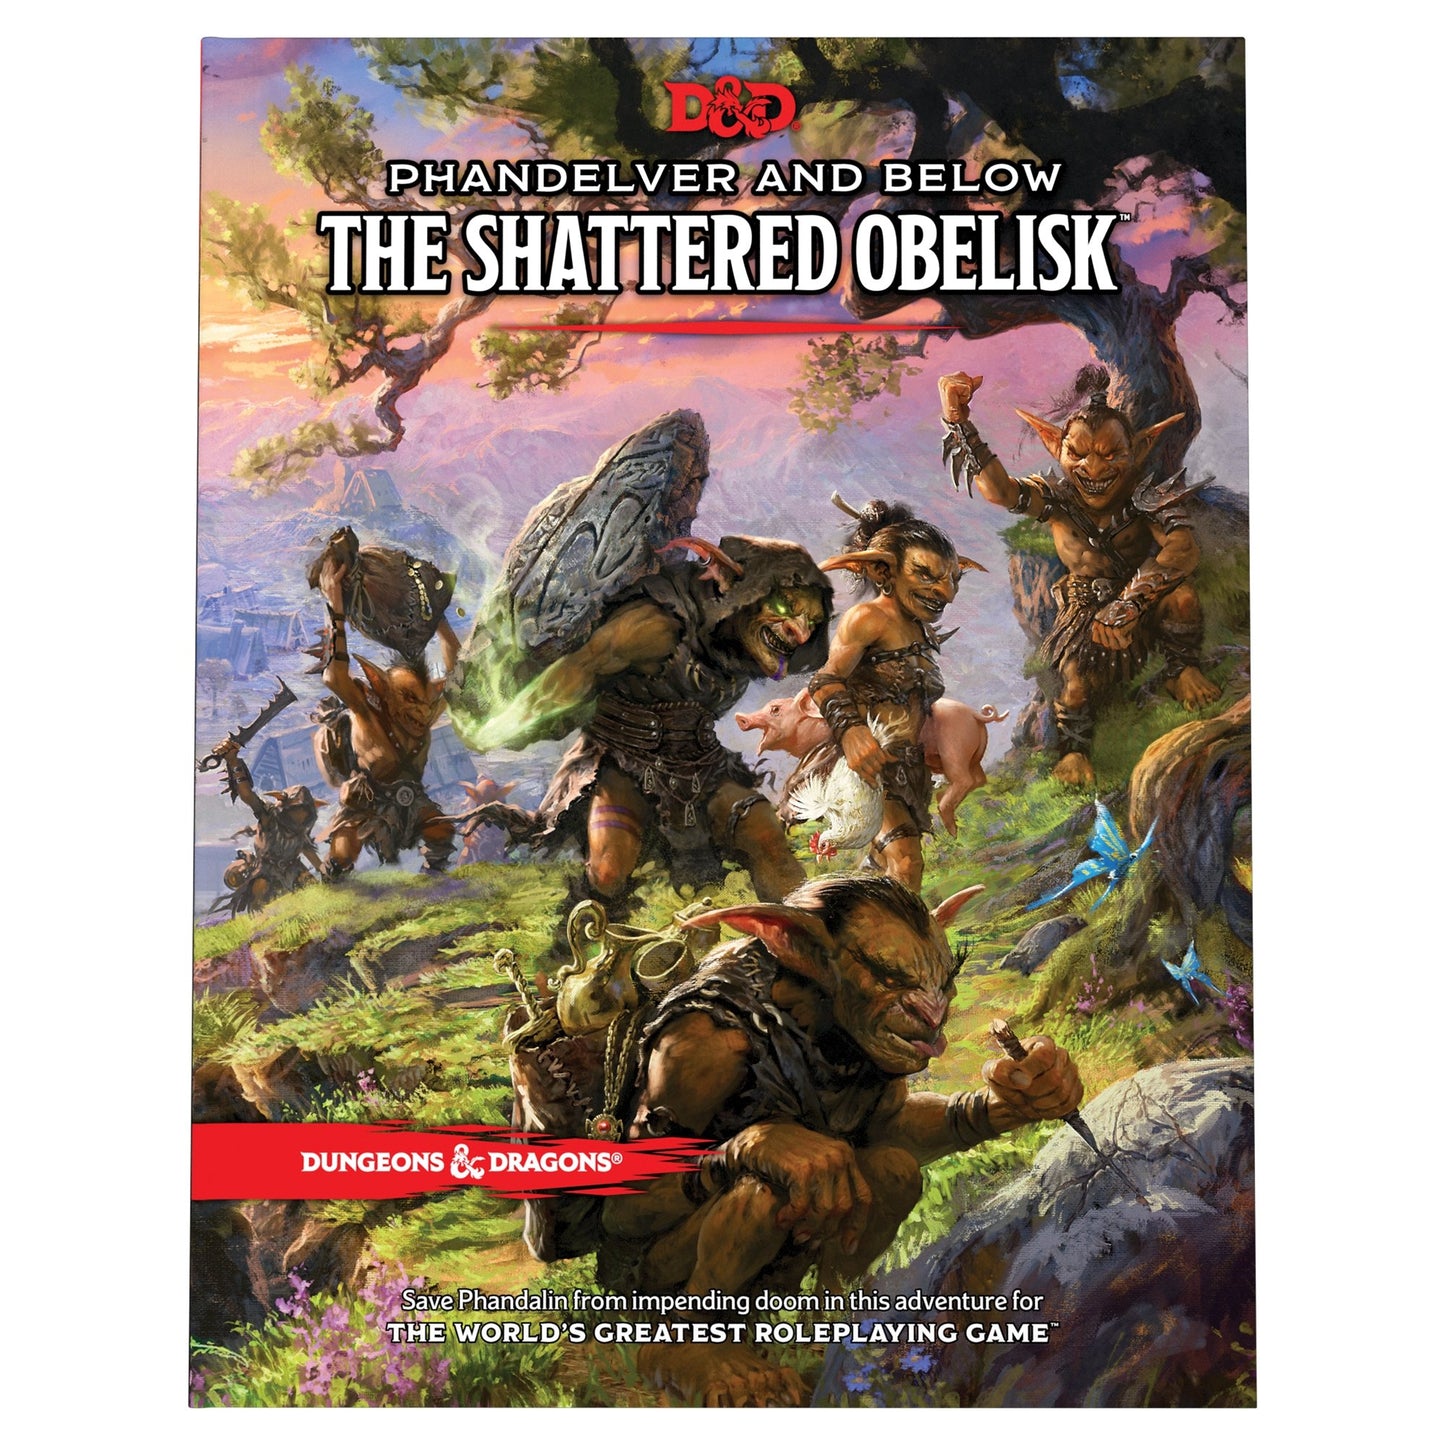 Dungeons & Dragons RPG: Phandelver And Below - The Shattered Obelisk from WIZARDS OF THE COAST, INC at The Compleat Strategist